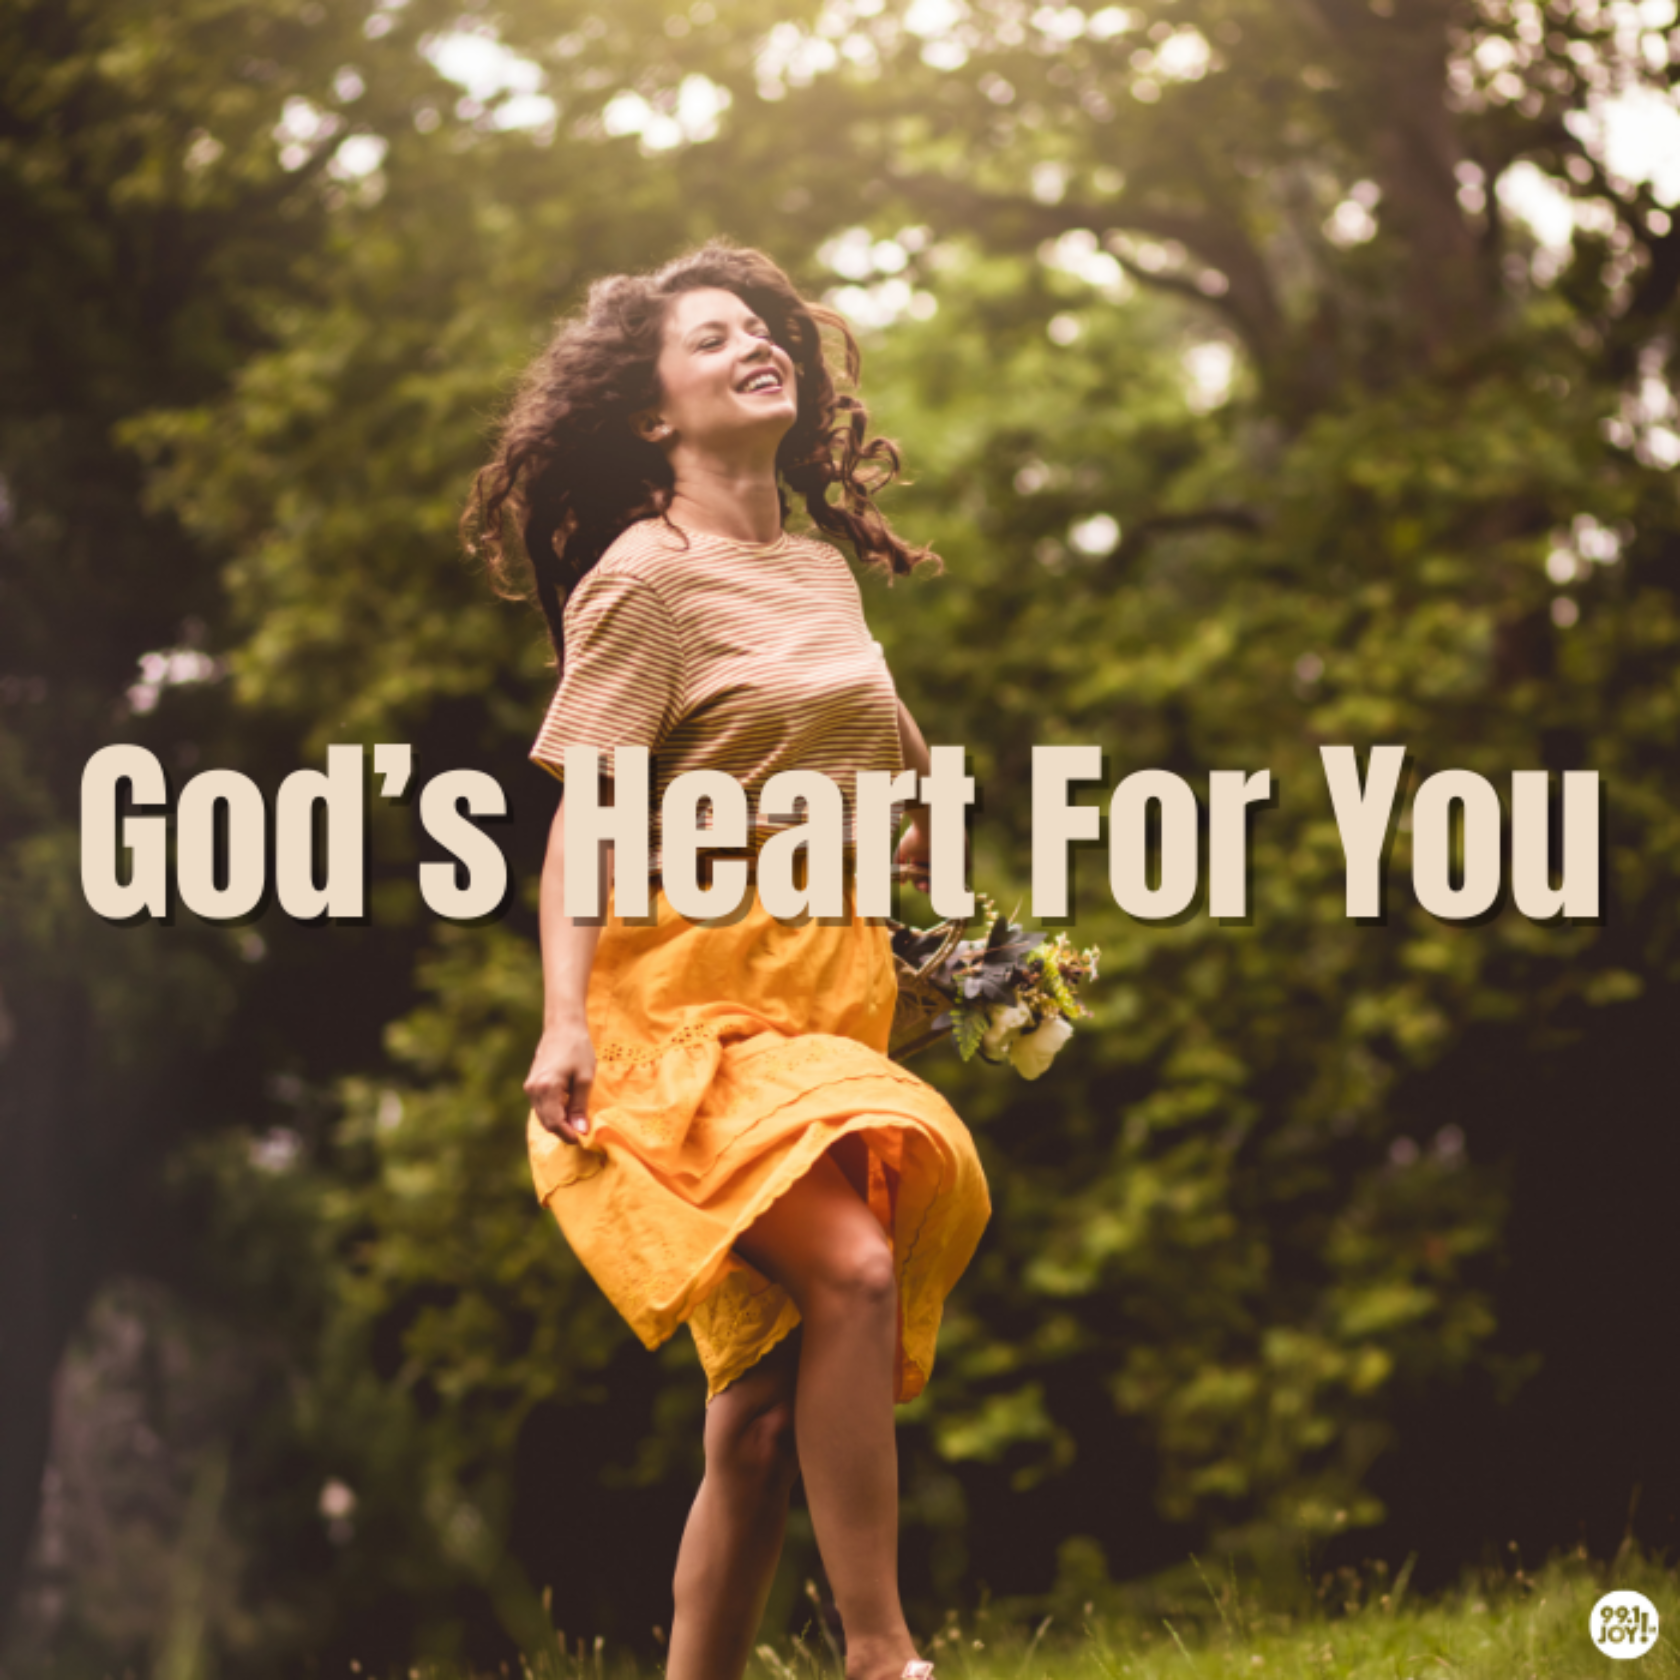 God’s Heart For You